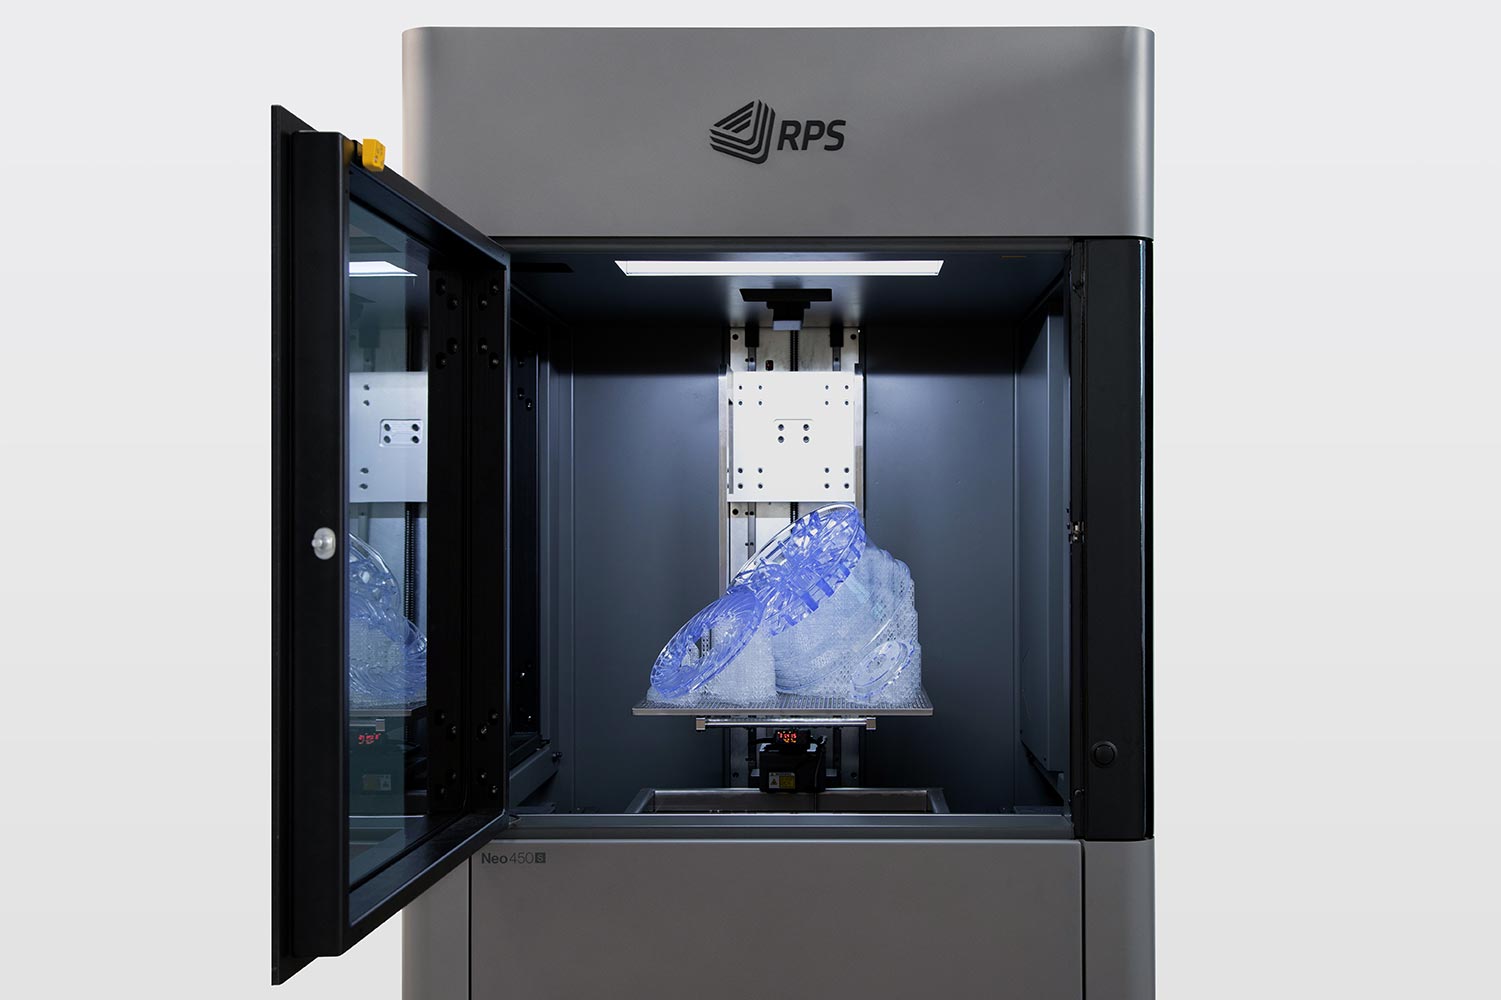 Stratasys aquires RPS, provider of best-in-class stereolithography 3D printers